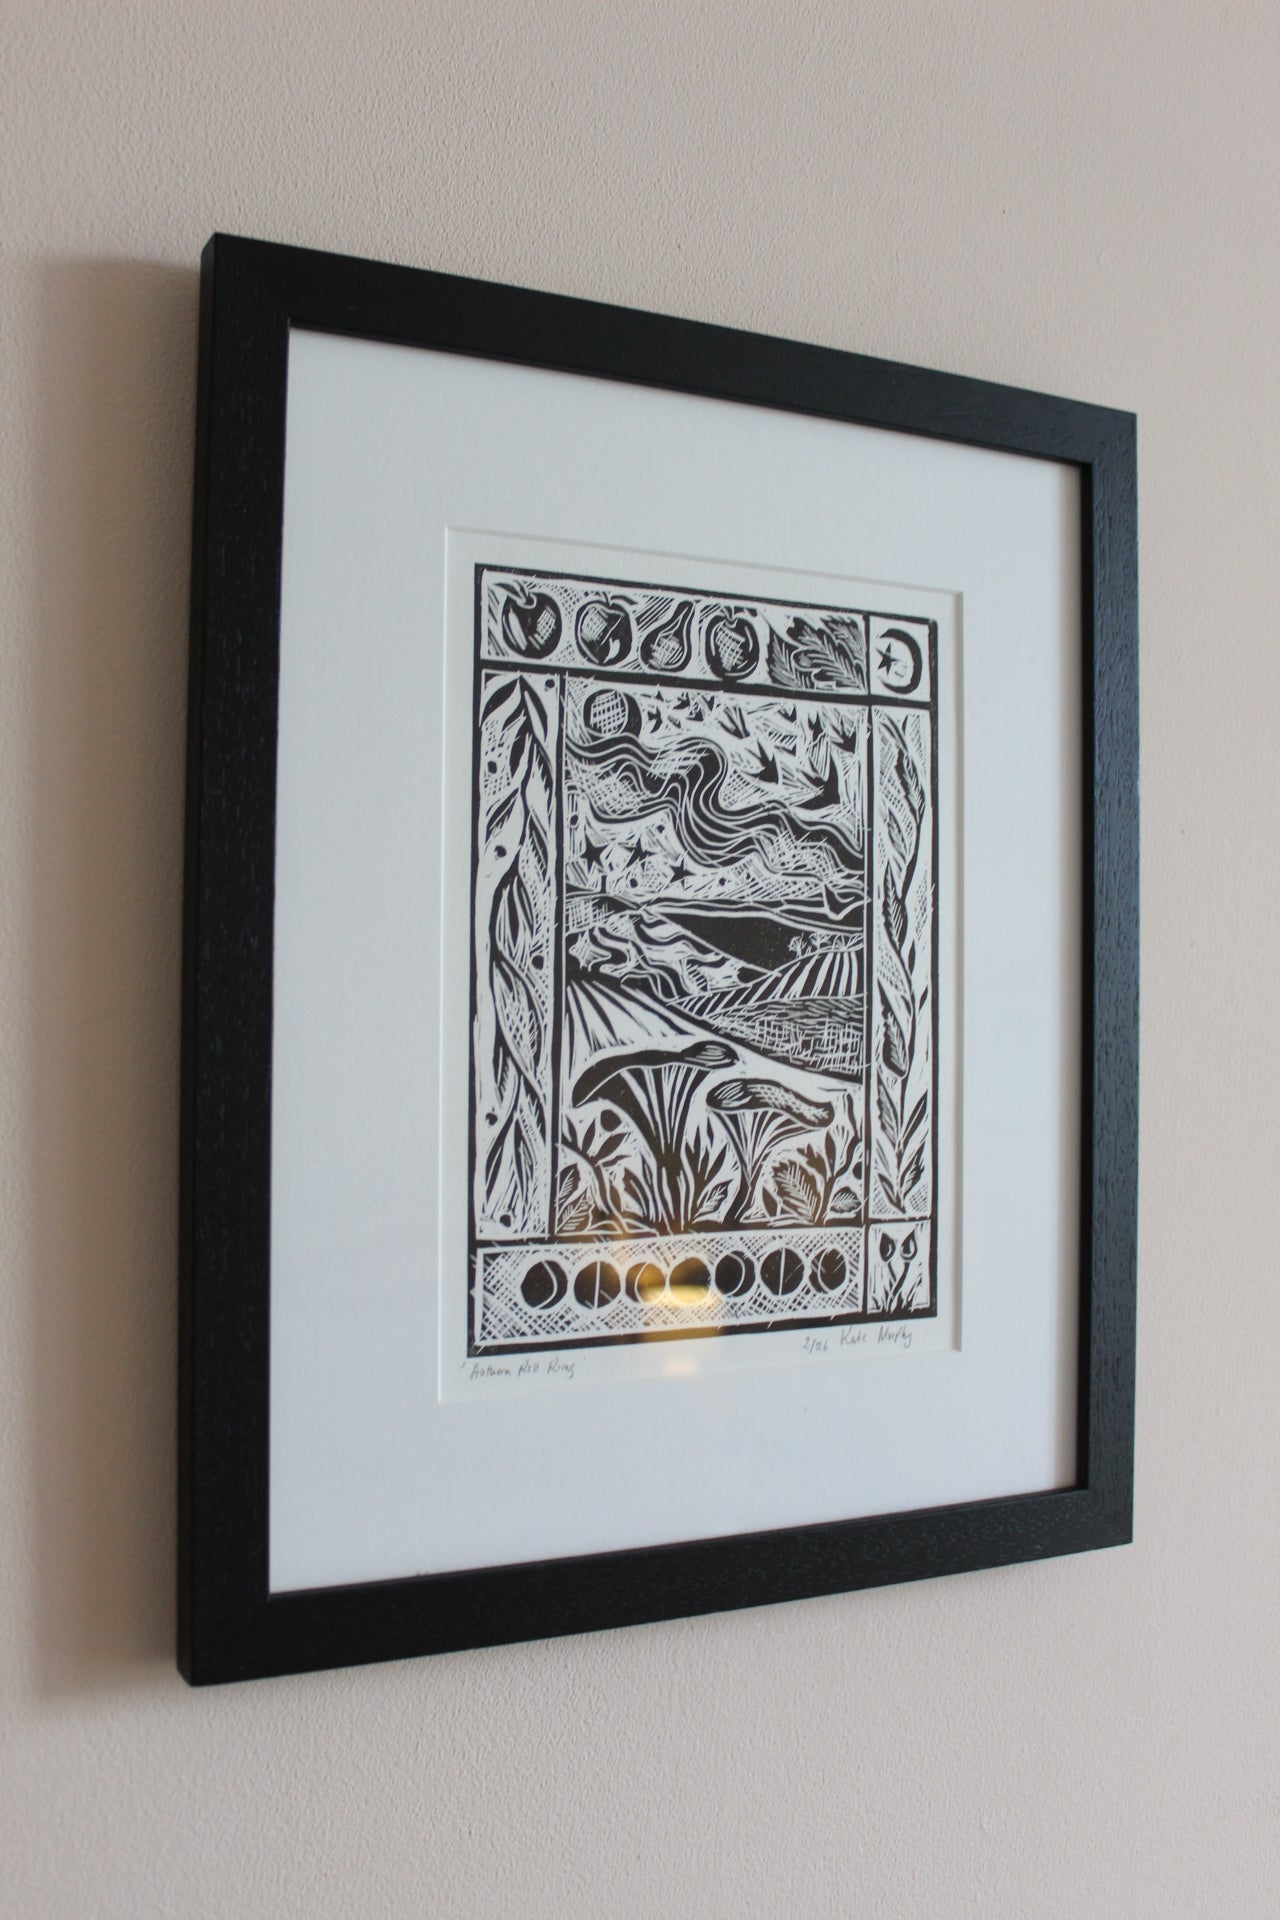 'Autumn Roll Rims' Framed limited edition lino print